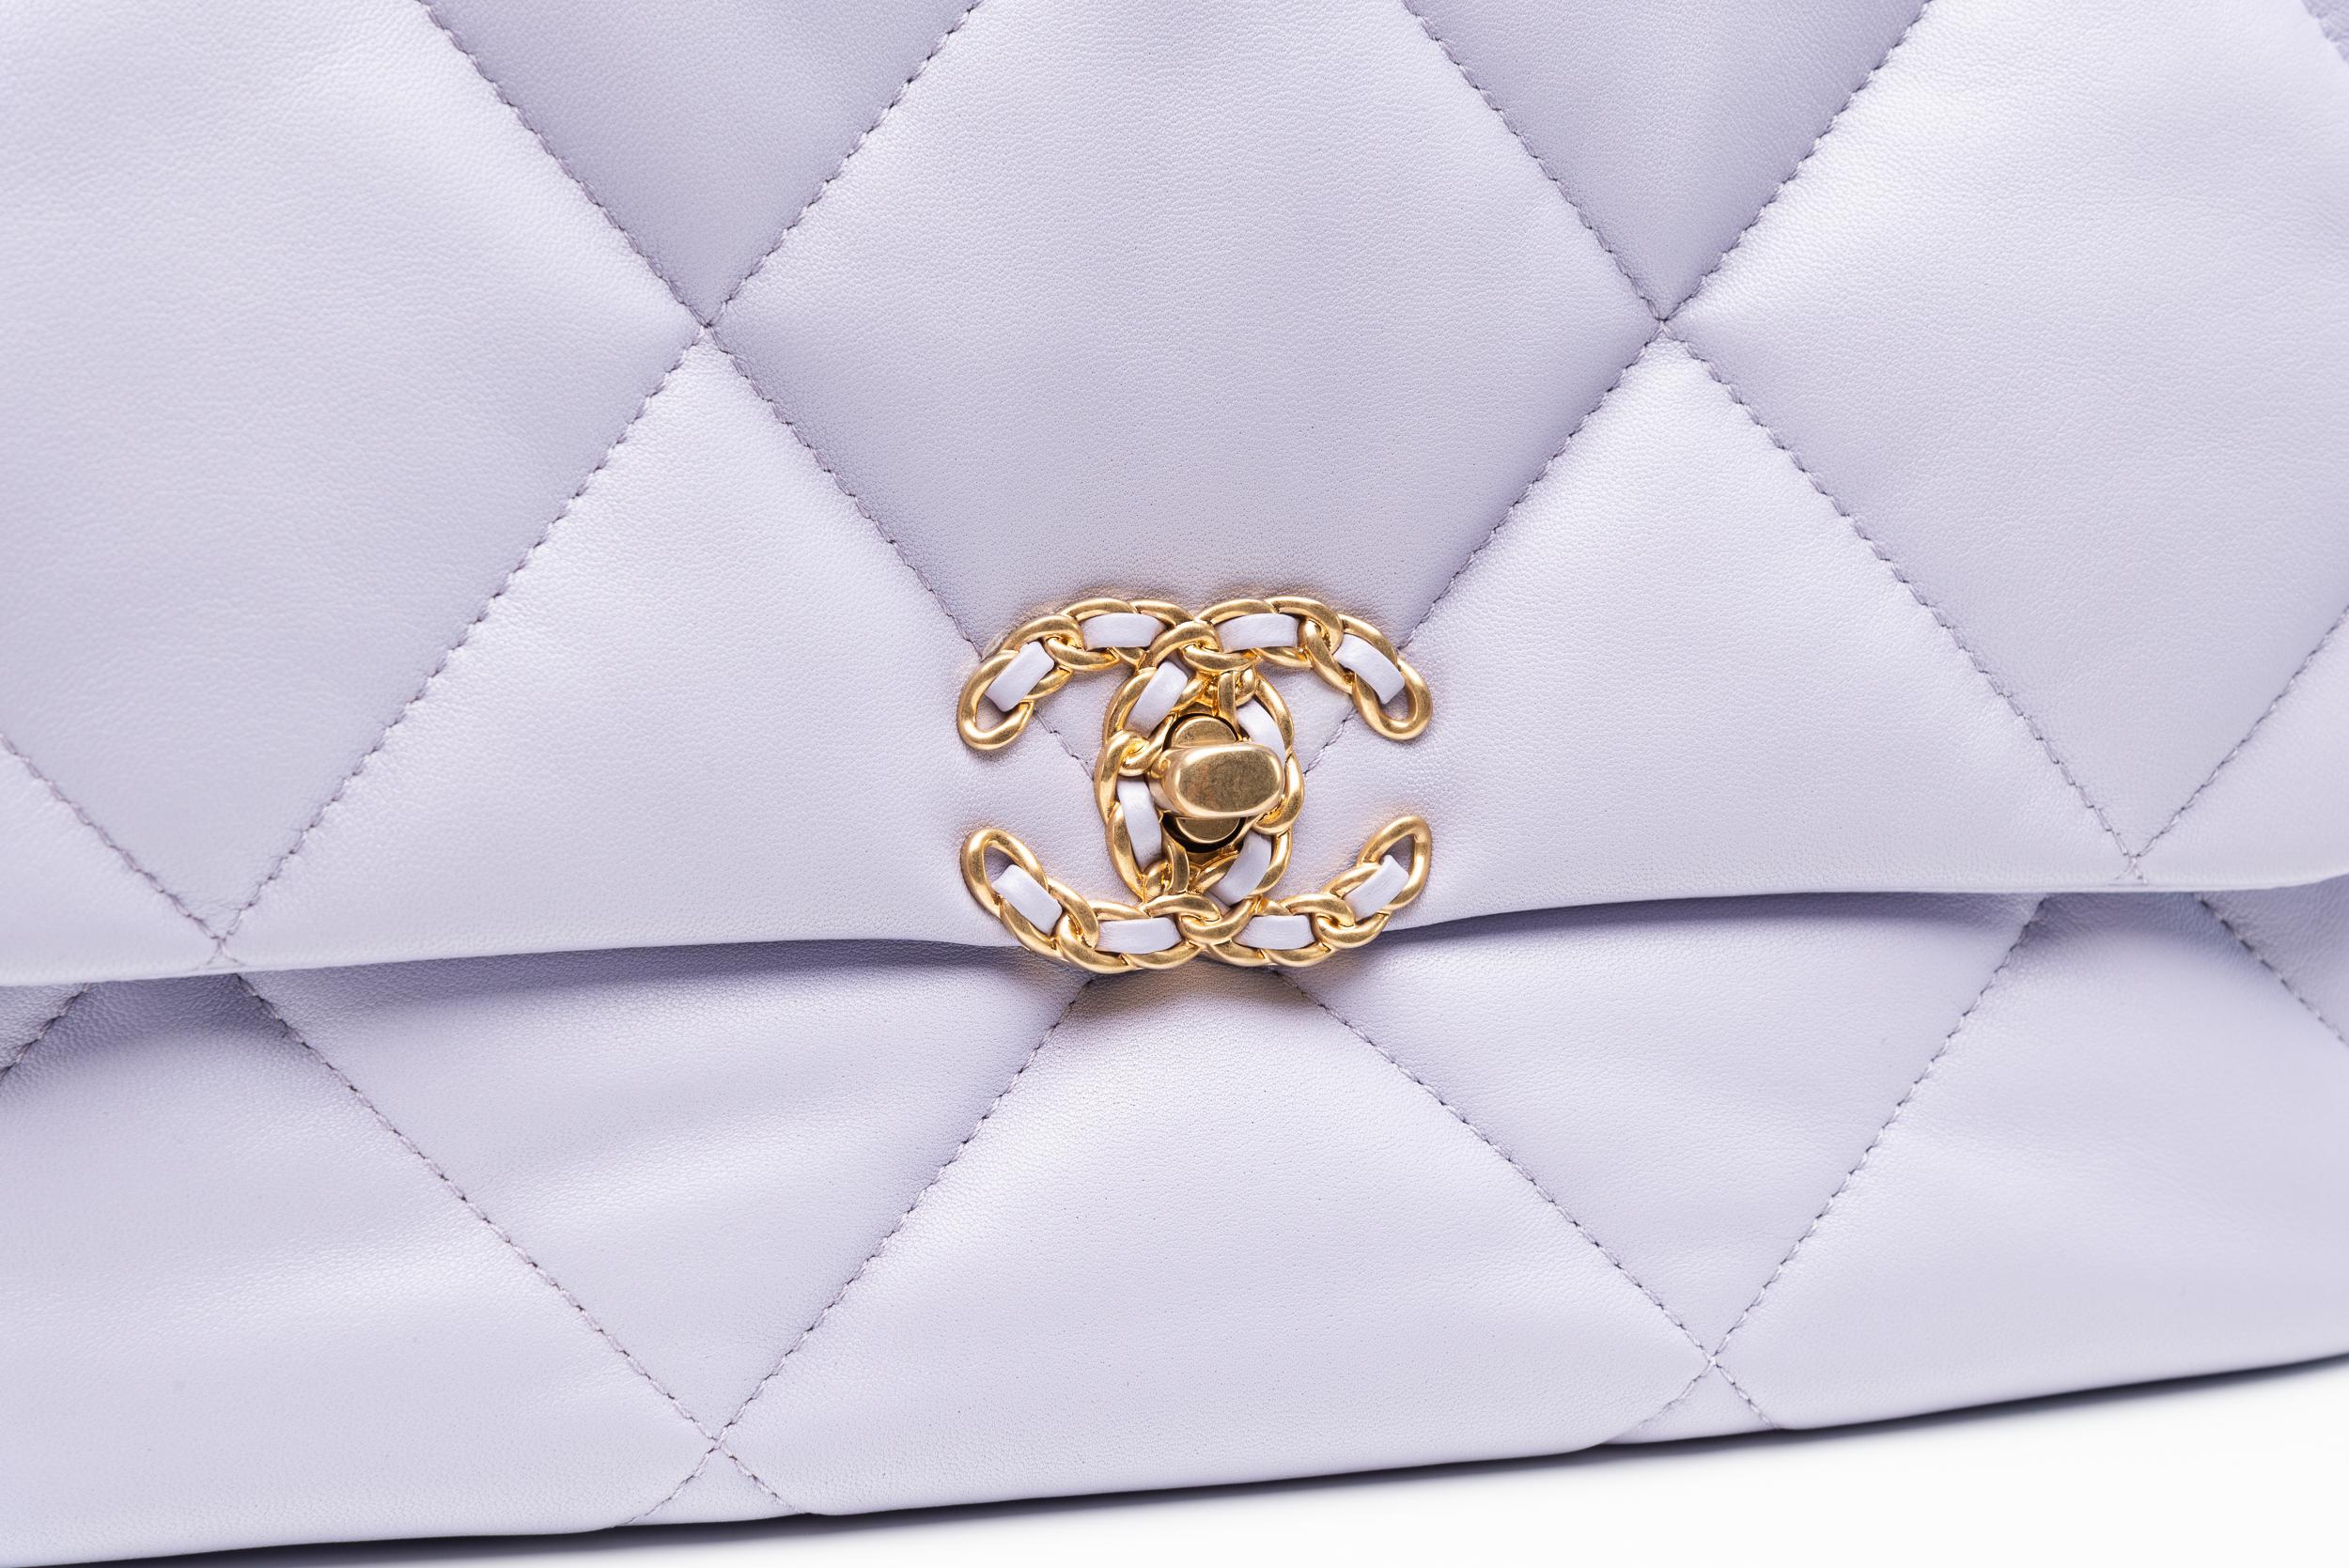 Chanel 19 Quilted Lambskin Lilac Large Flap Bag NEW 2